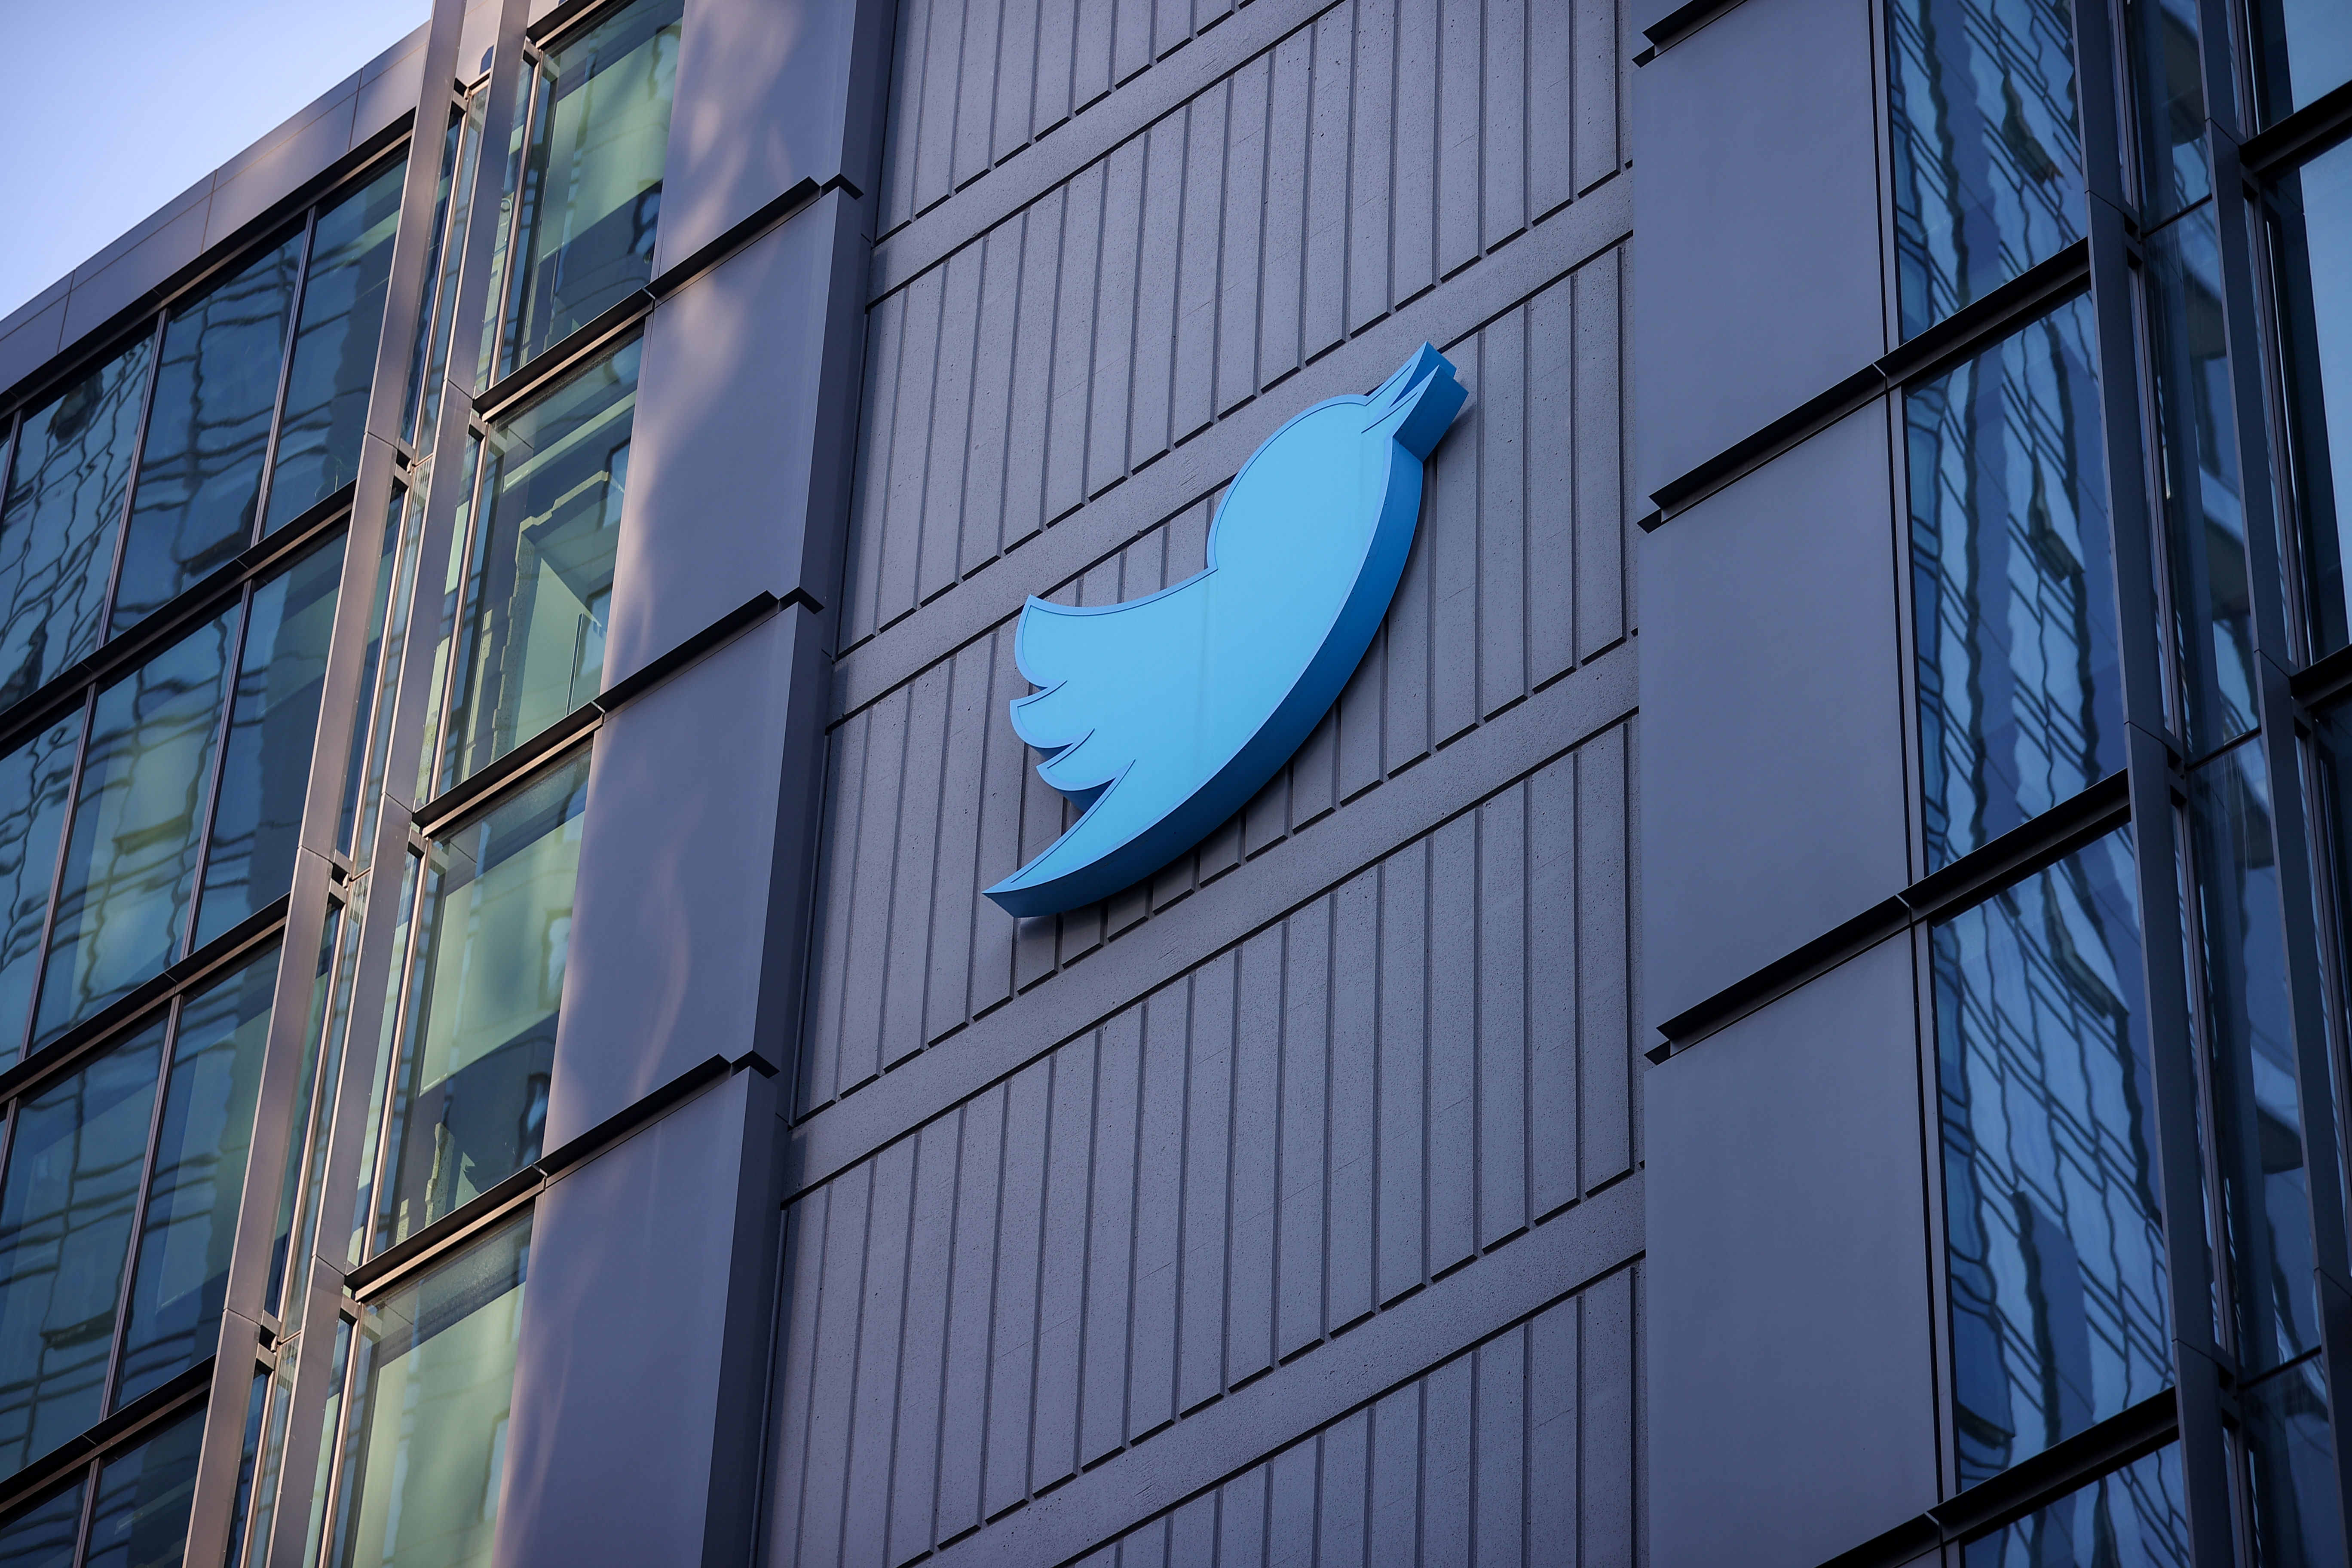 Twitter bans sharing 'private' images and videos without consent | Engadget